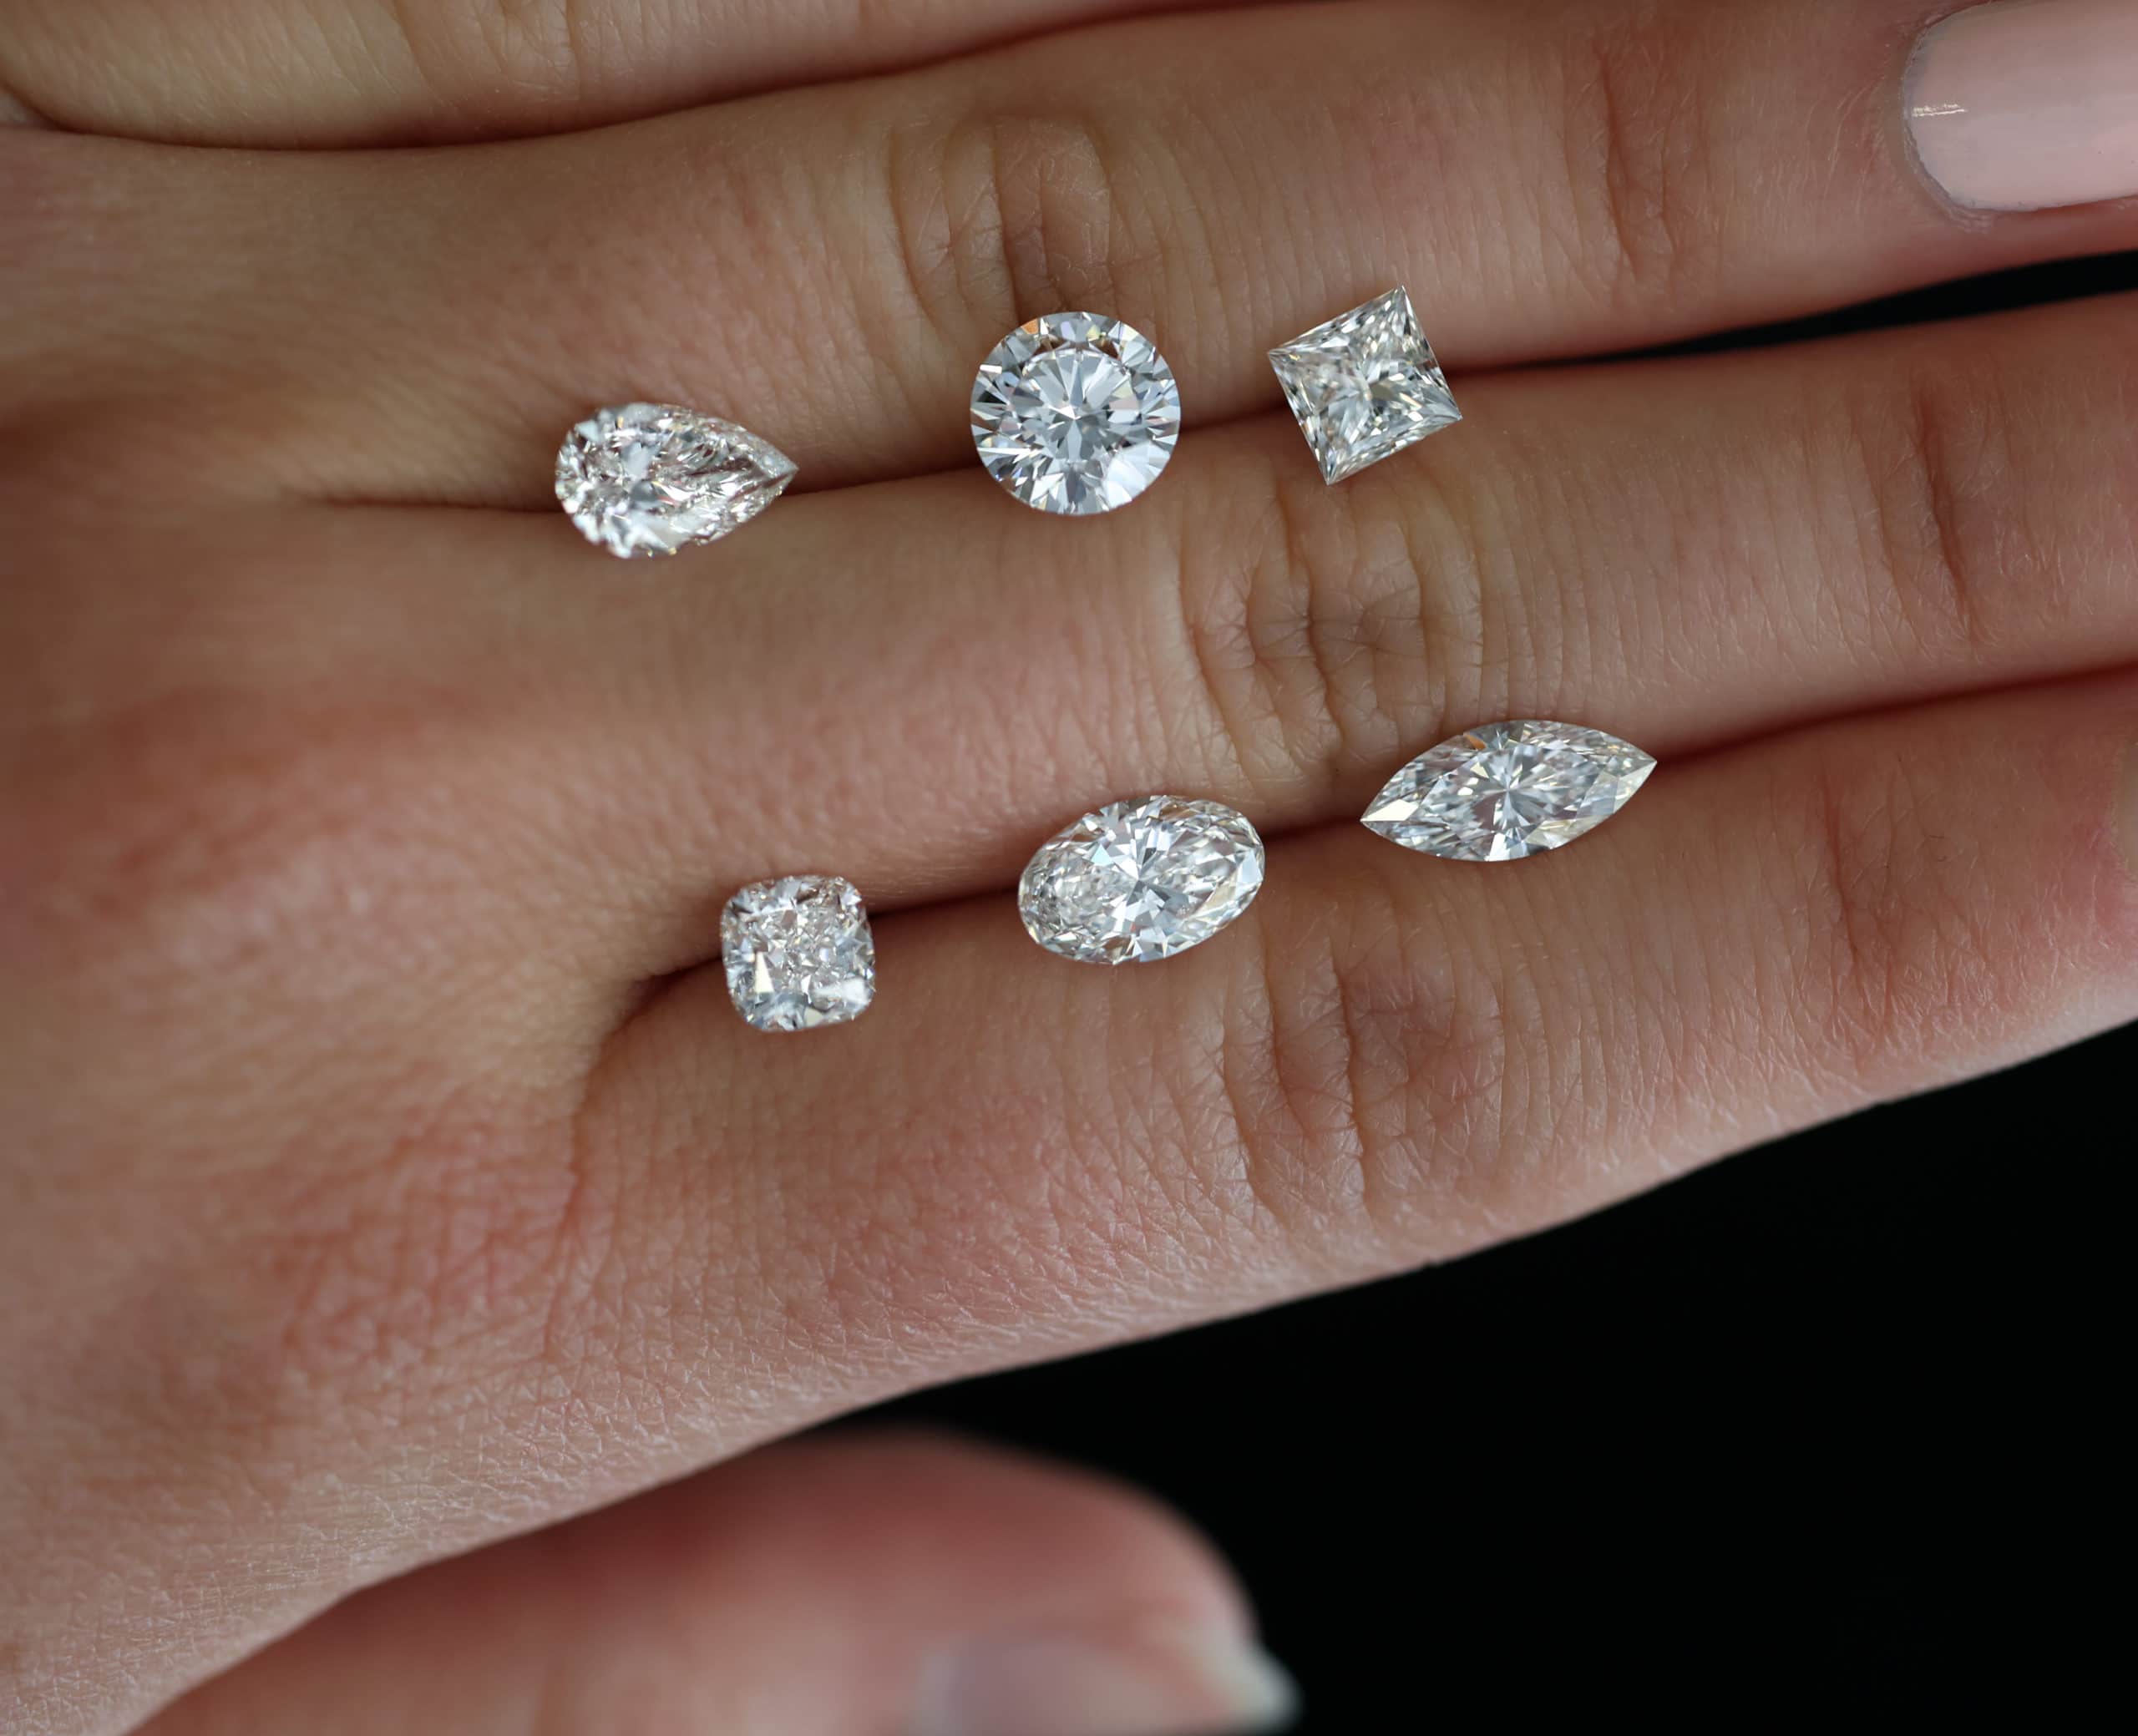 How Expensive Are Diamond Engagement Rings? | WP Diamonds